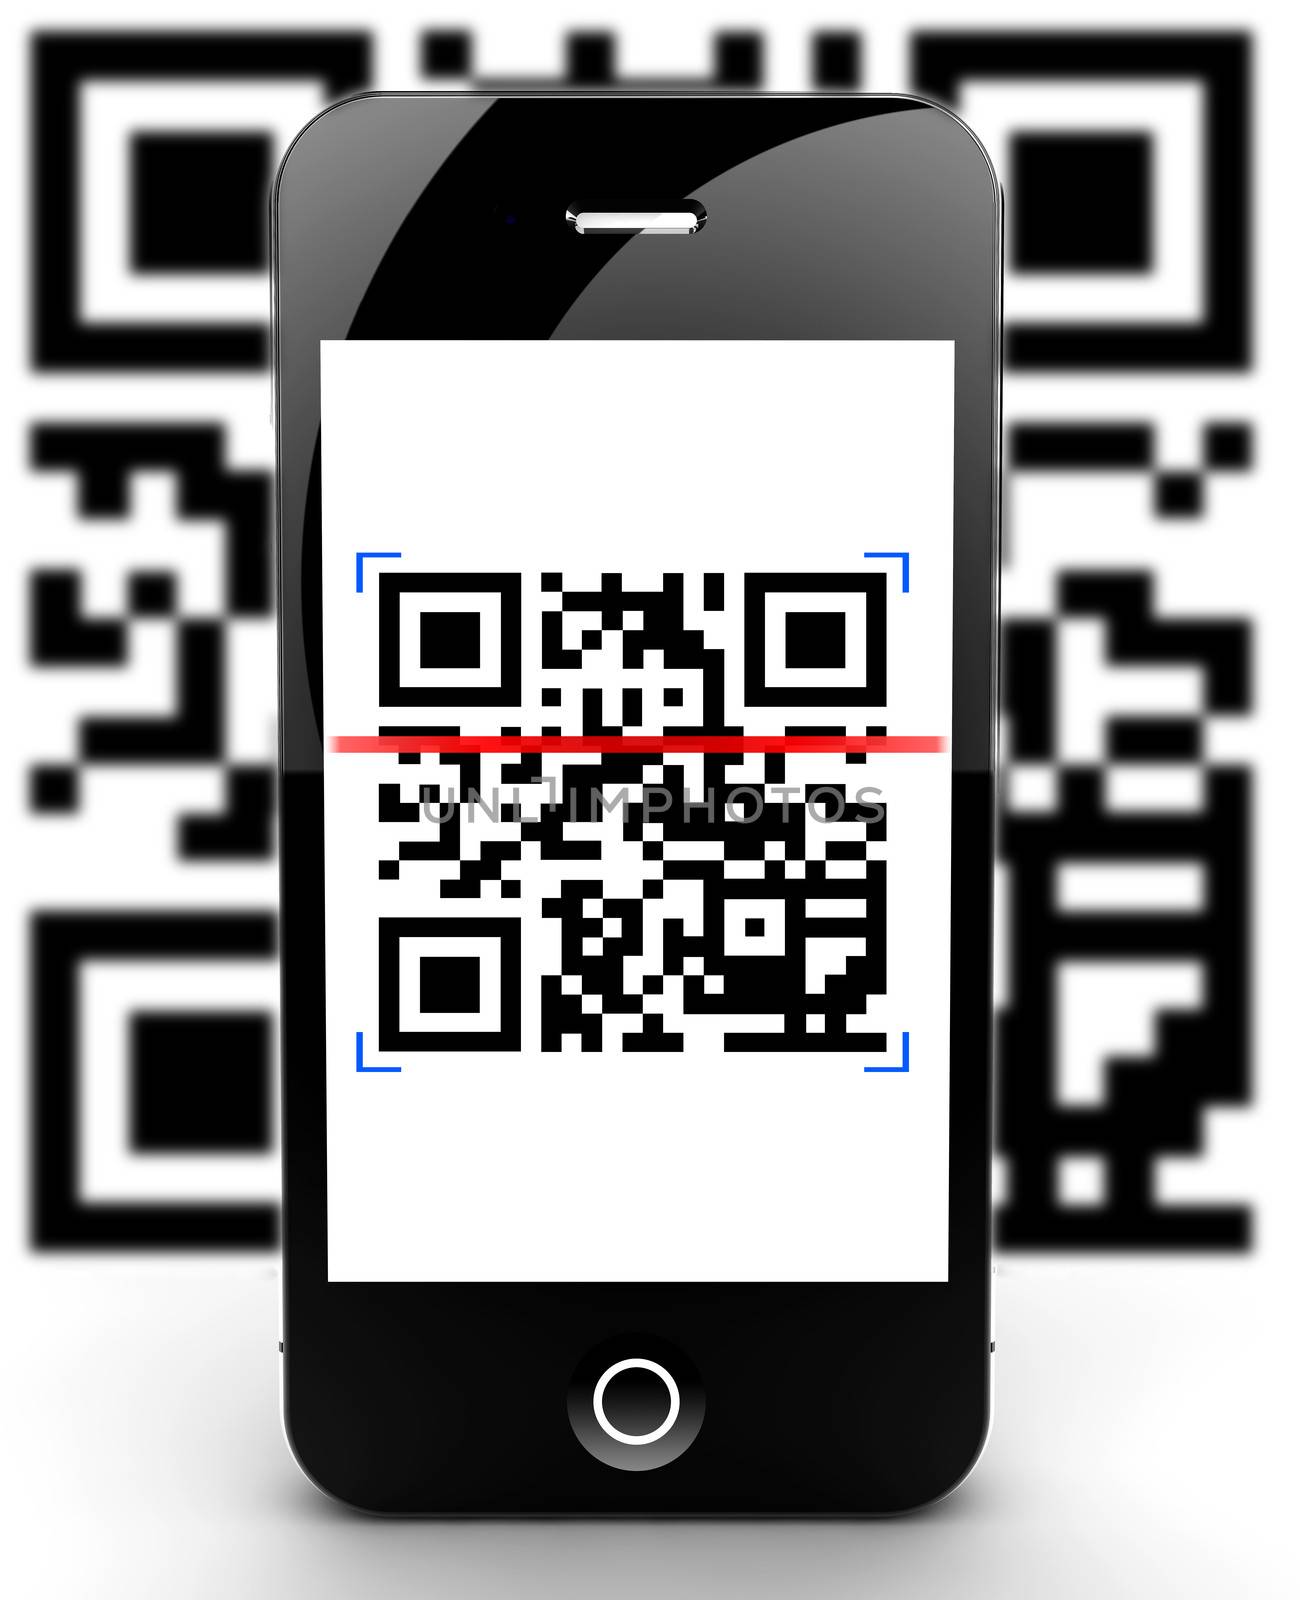 Smartphone scanning code out of focus by cla78